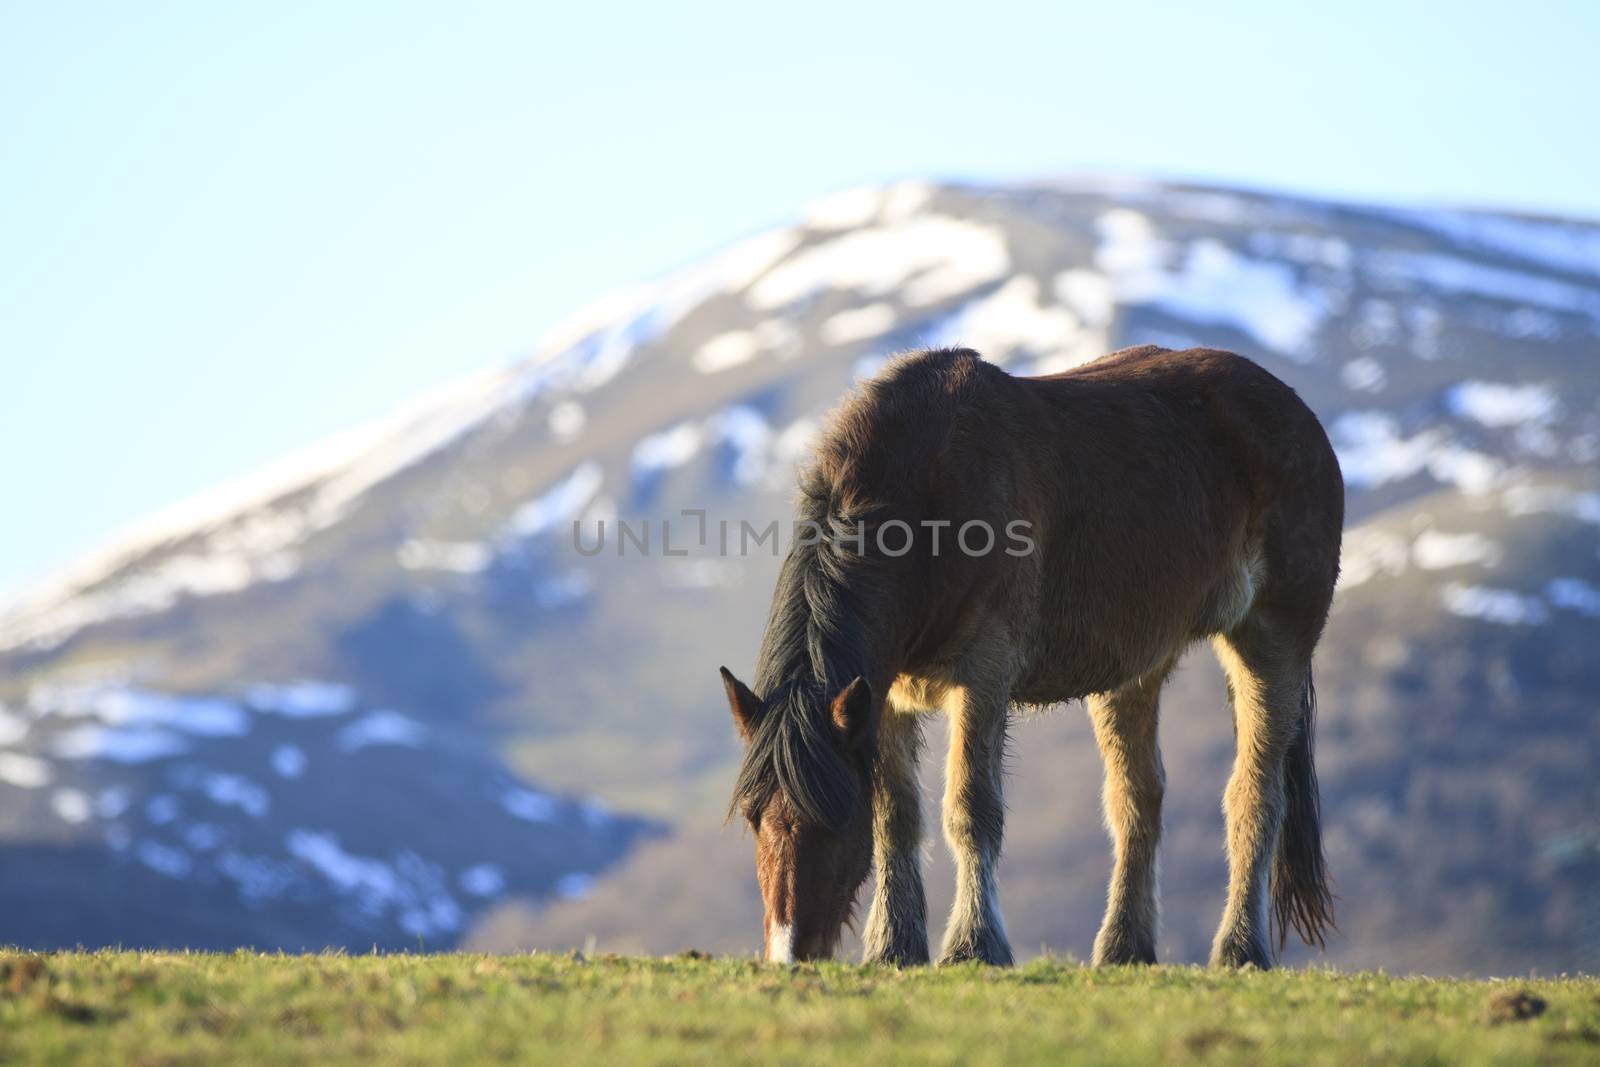 Horse feeding and snow mountain at background.